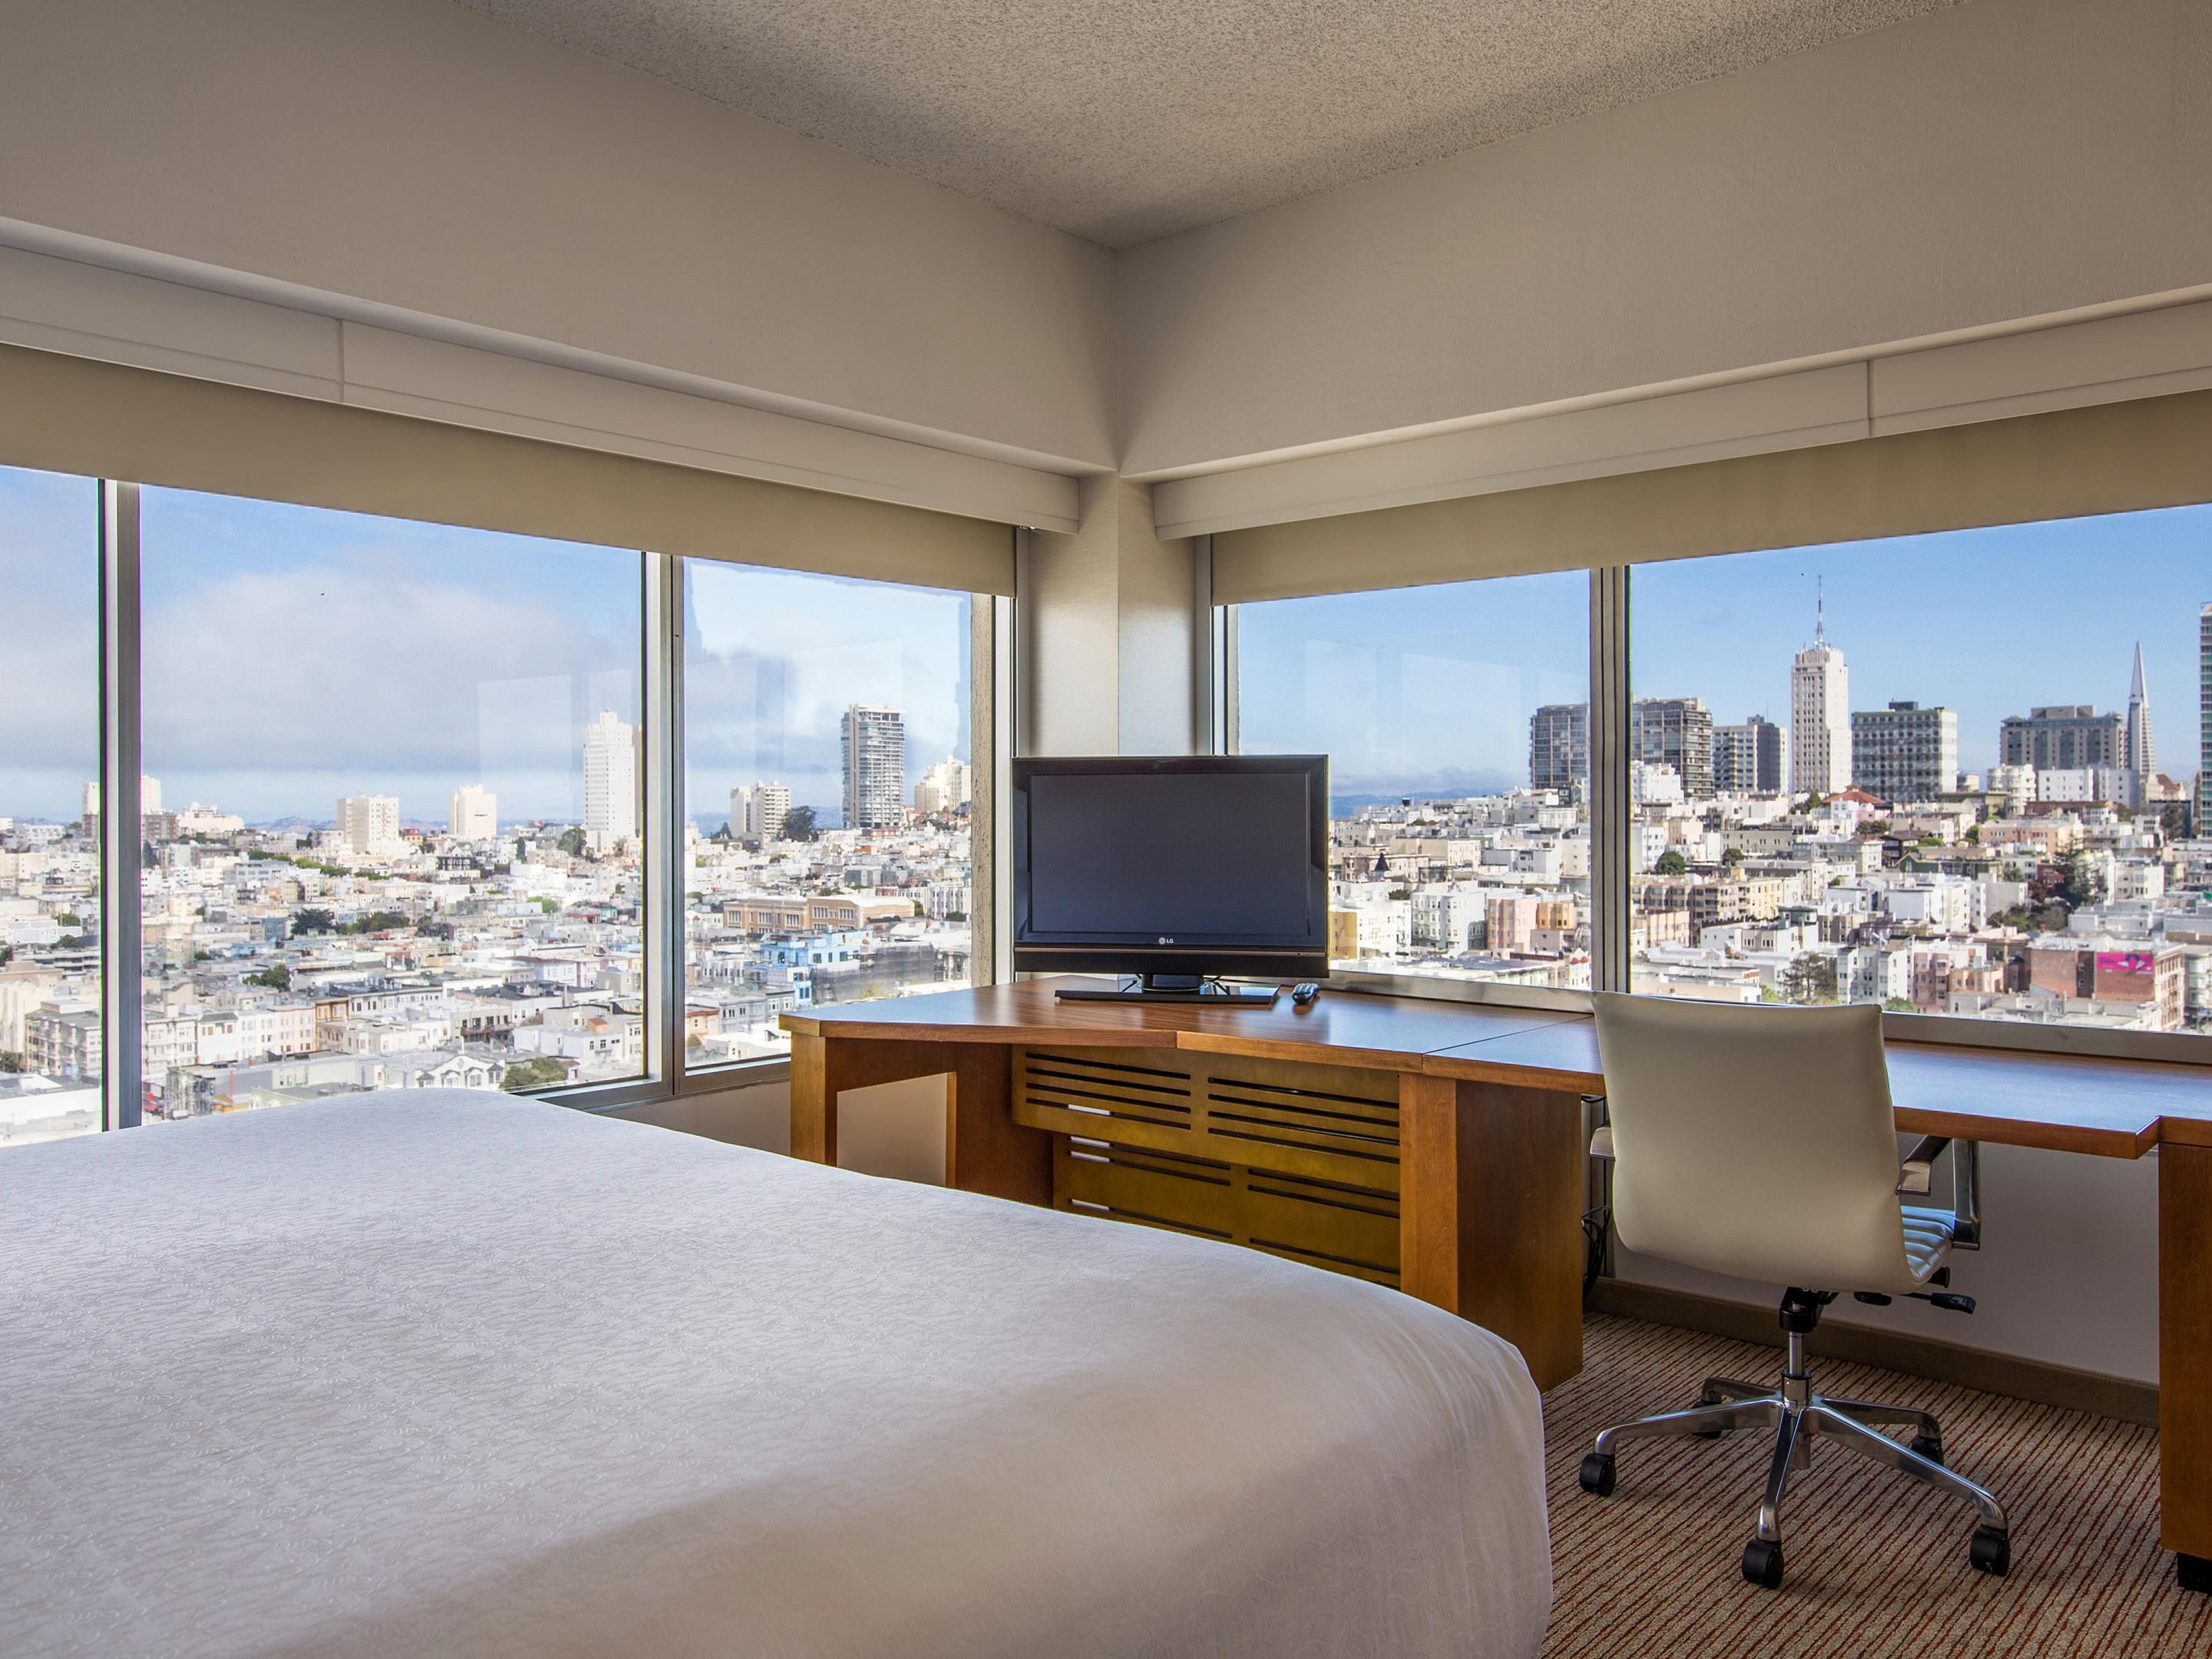 Start and end your day in your newly modernized room or suite. Elevate your San Francisco experience with modern accommodations which offer breathtaking city and bay views at an affordable price.
